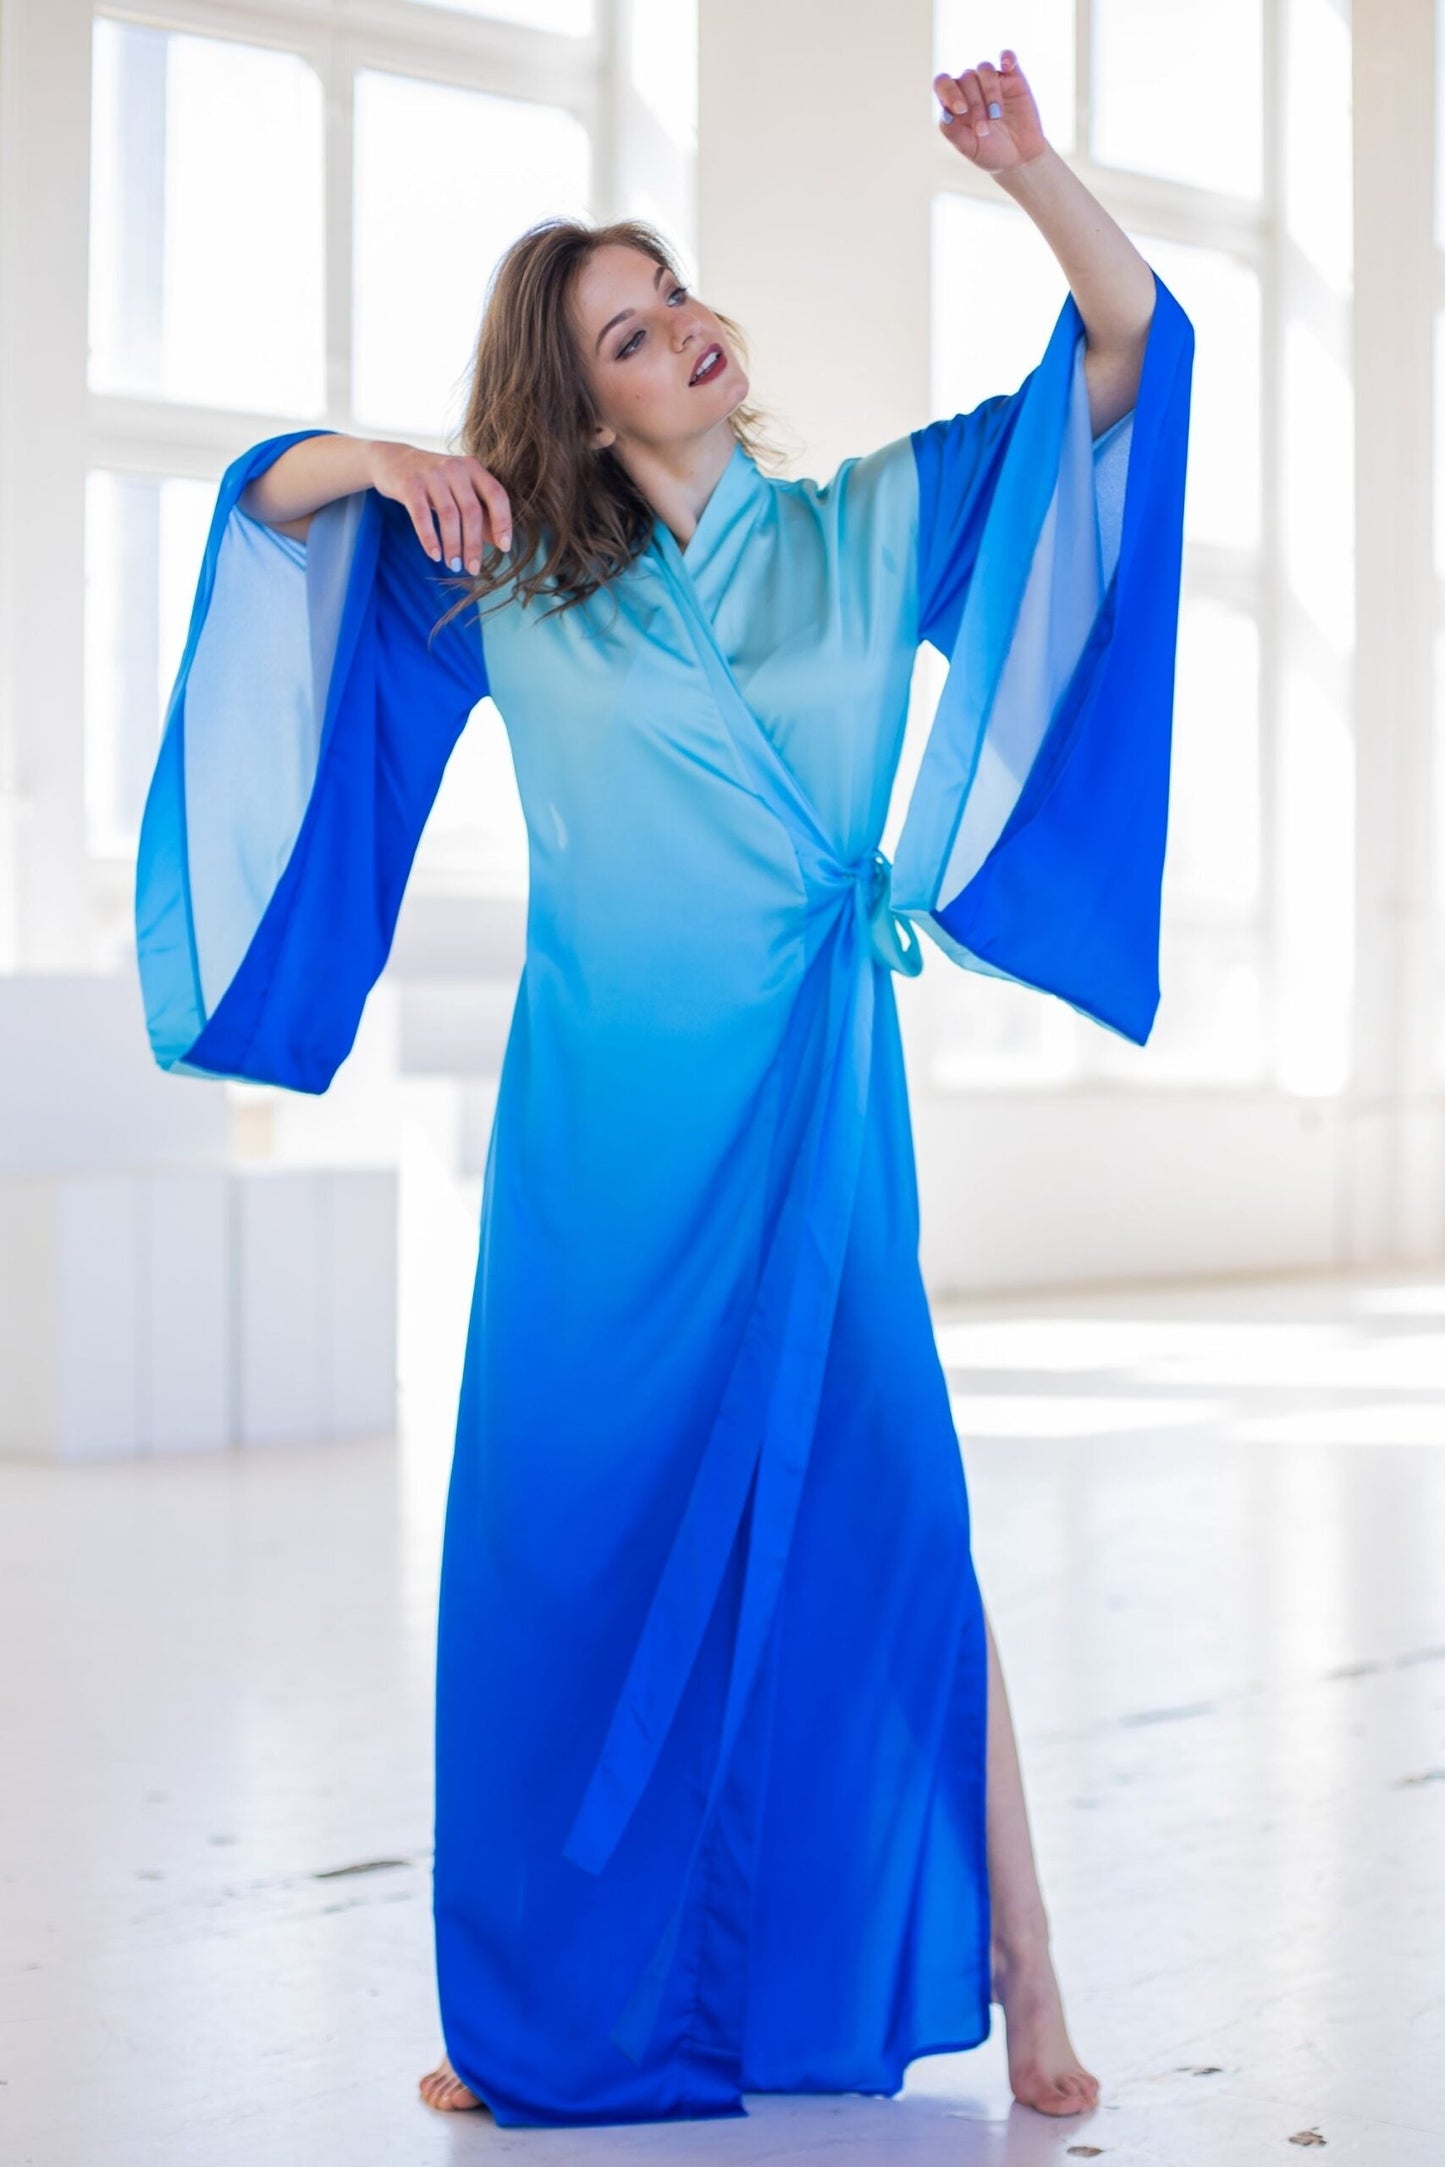 Satin kimono dress with color transitions in shades of blue